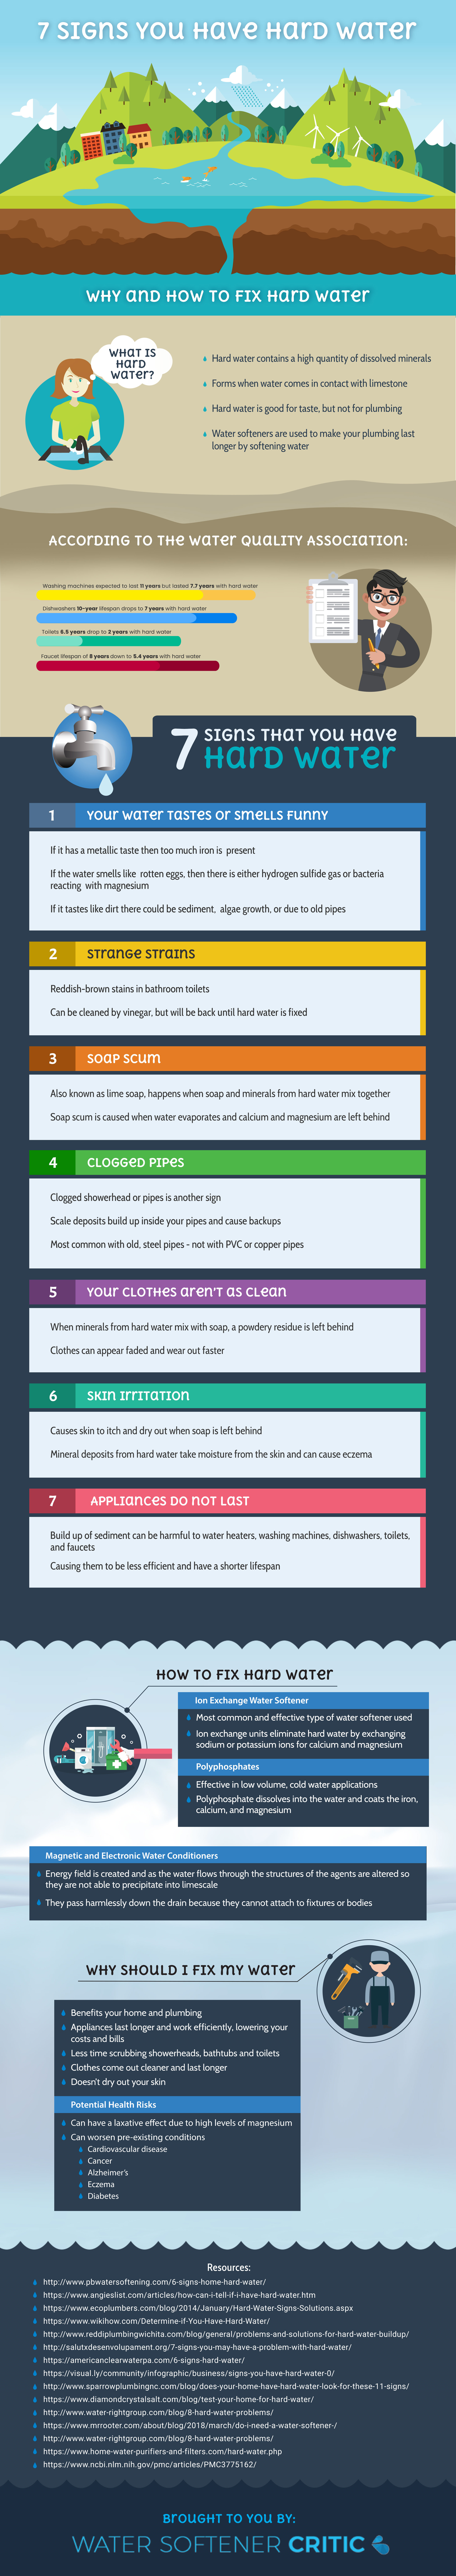 7 Signs You Have Hard Water Infographic - Water Softener Critic